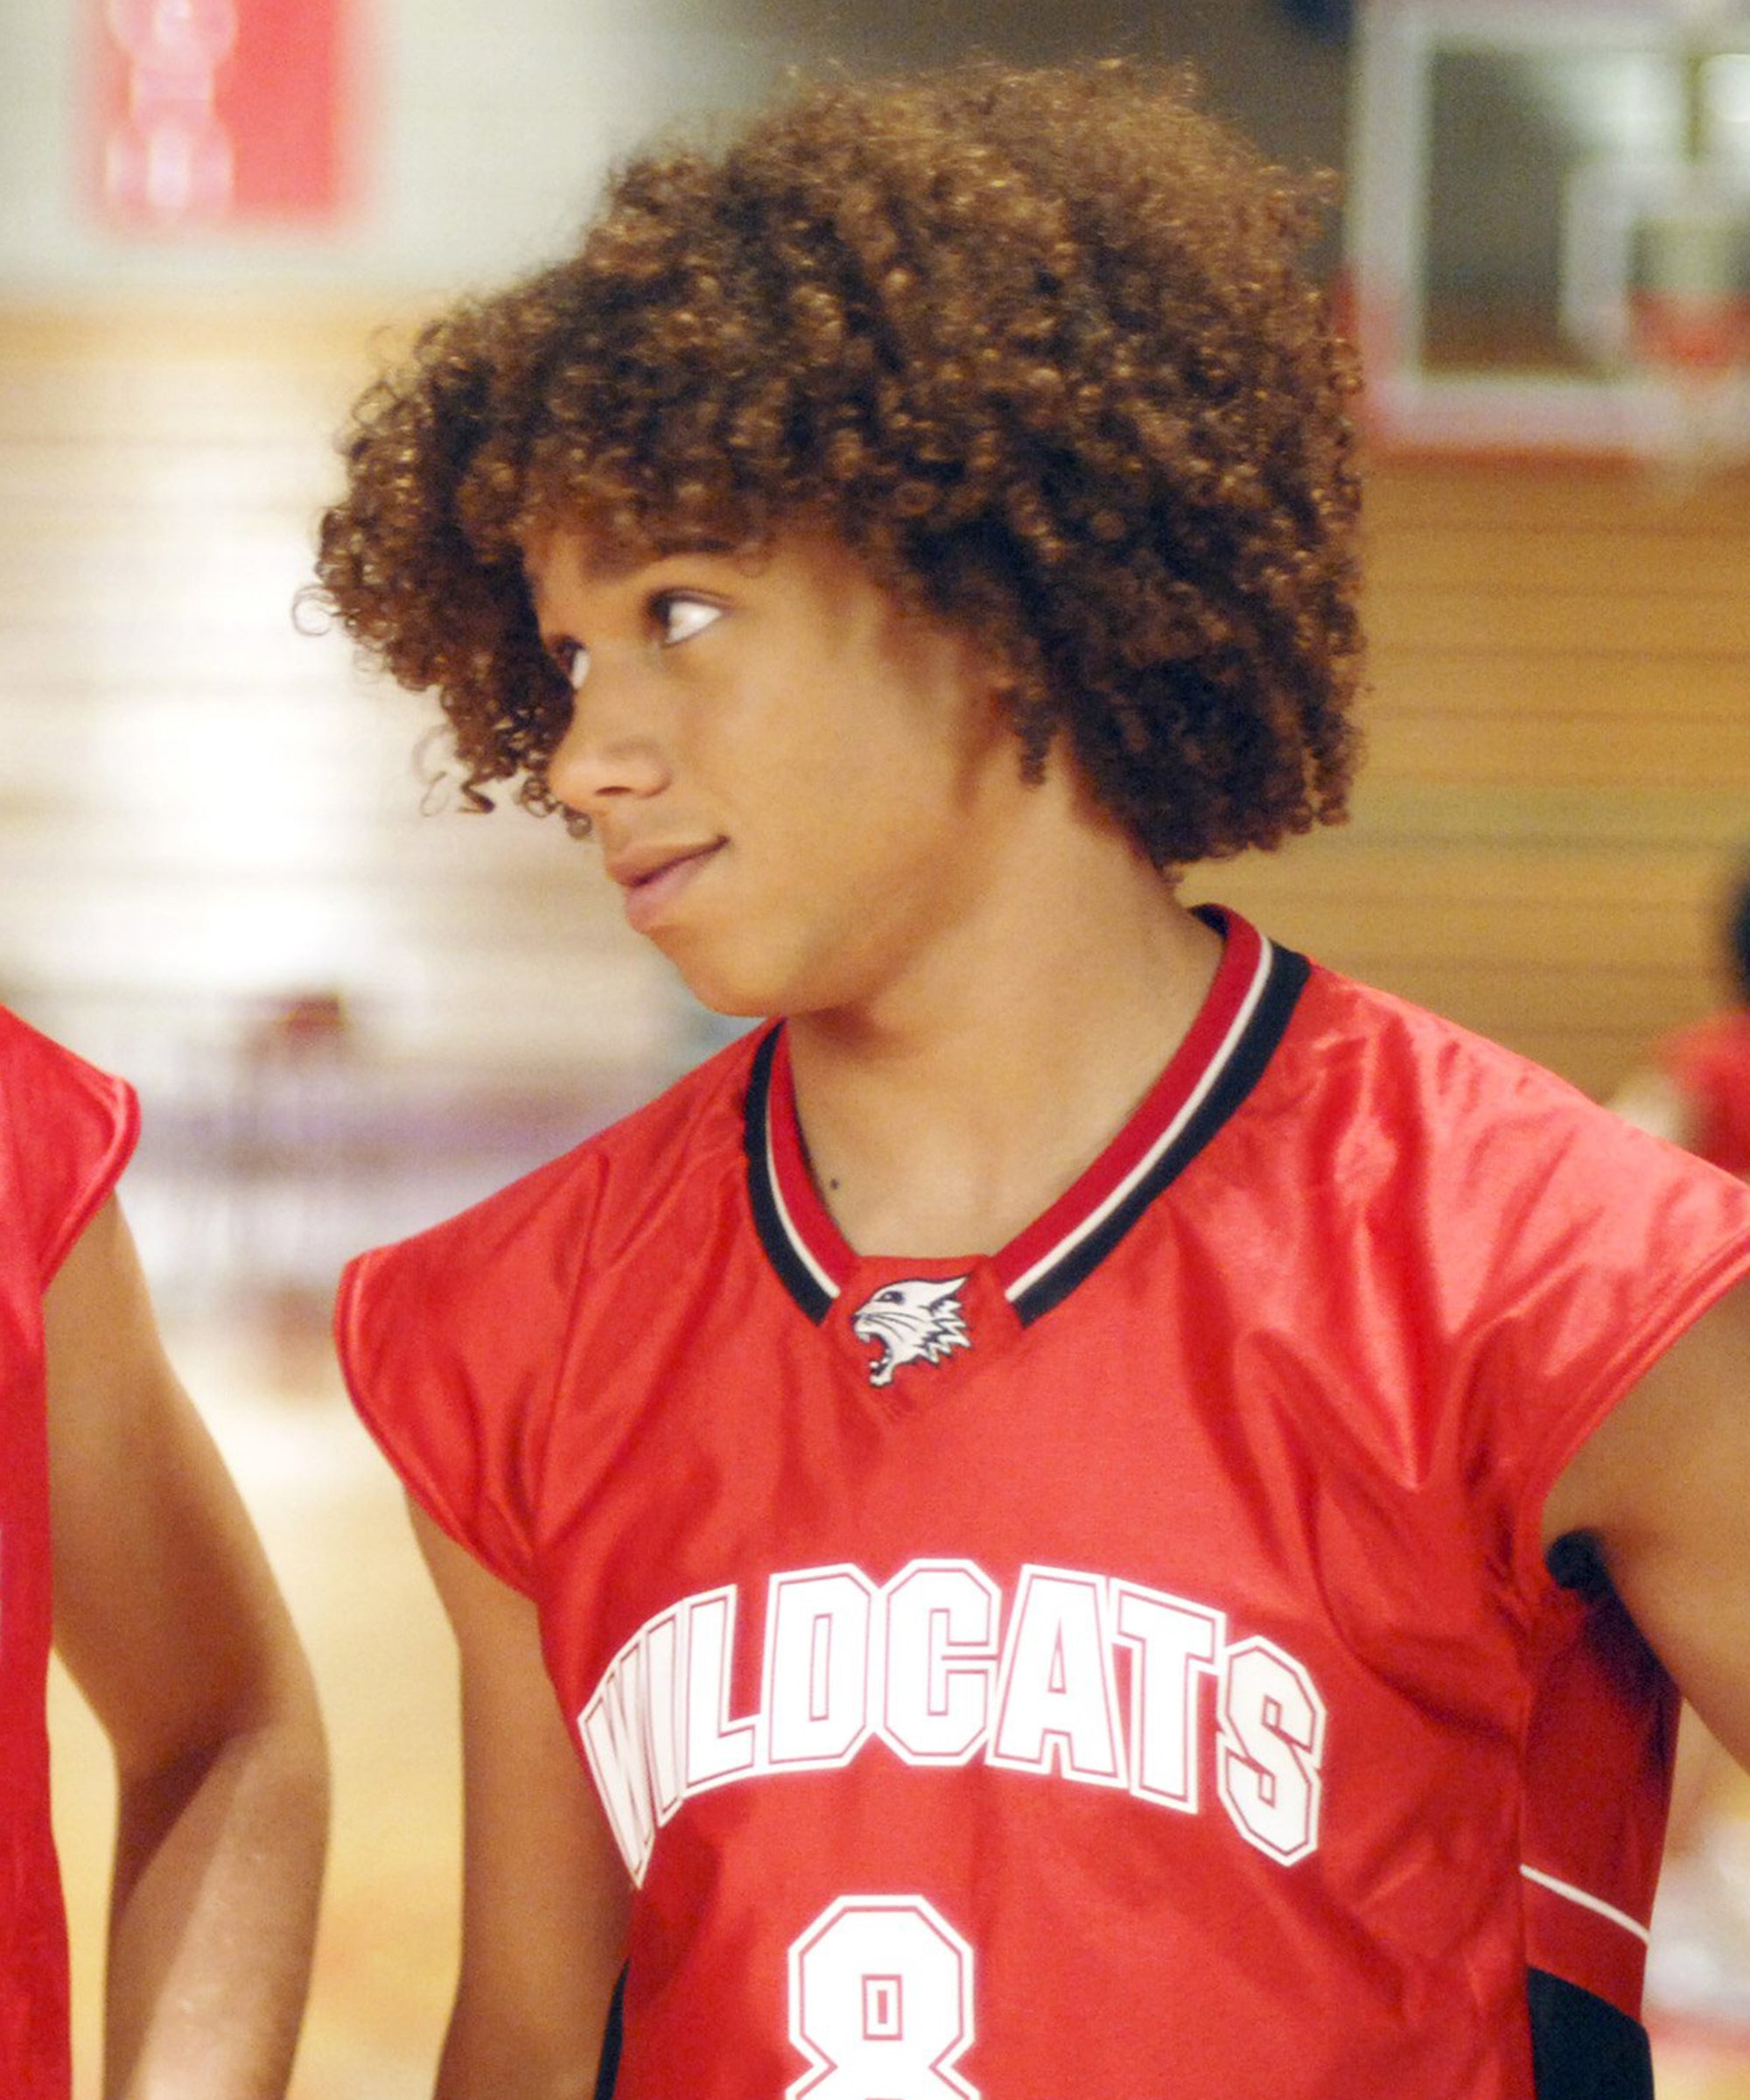 troy from high school musical